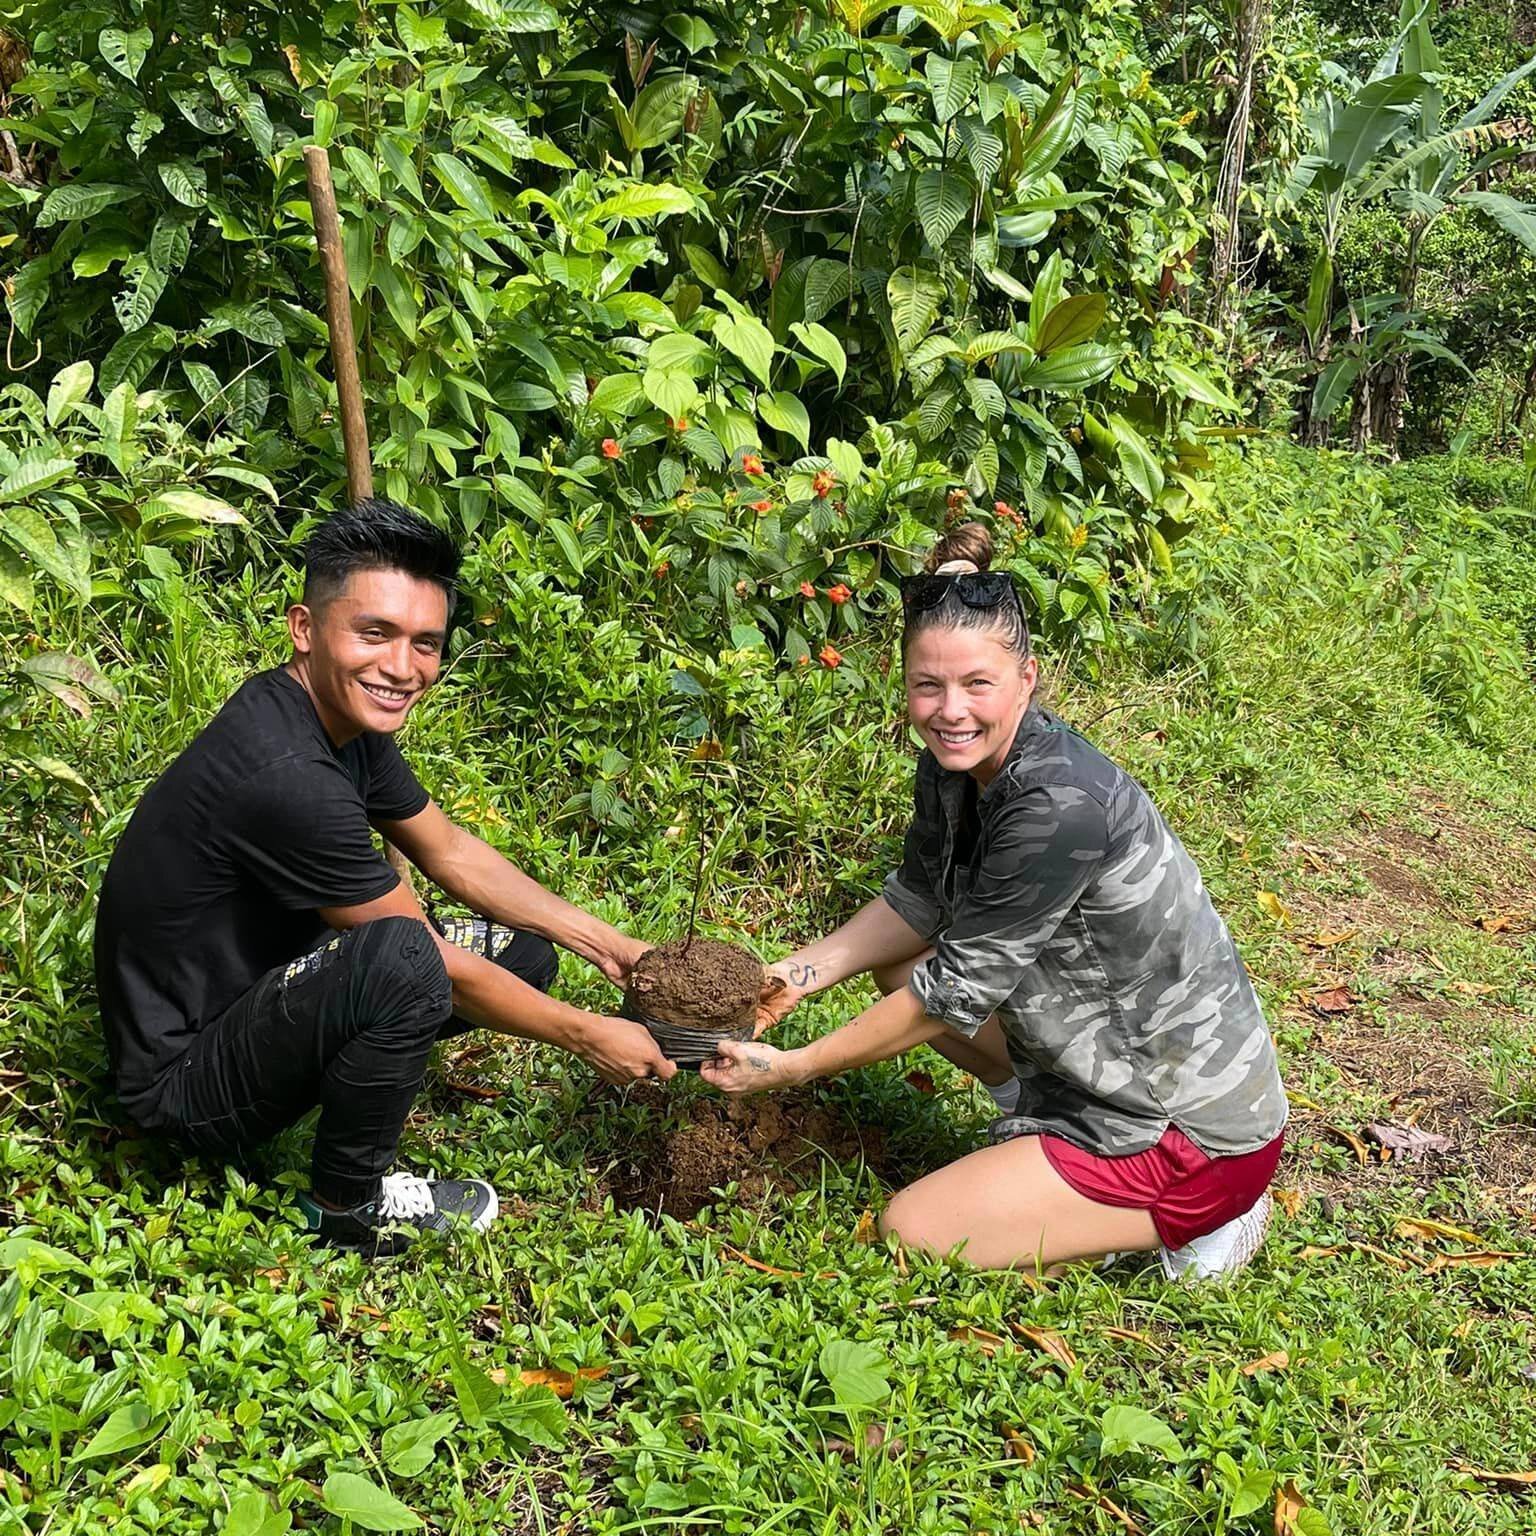 Our Just One Tree Project grows saplings from our mature Almendro Trees which, with the help of our community partners, we transplant to bio-sensitive regions of Bocas del Toro, Panama where they are protected. To date we&rsquo;ve supplied over 12,00